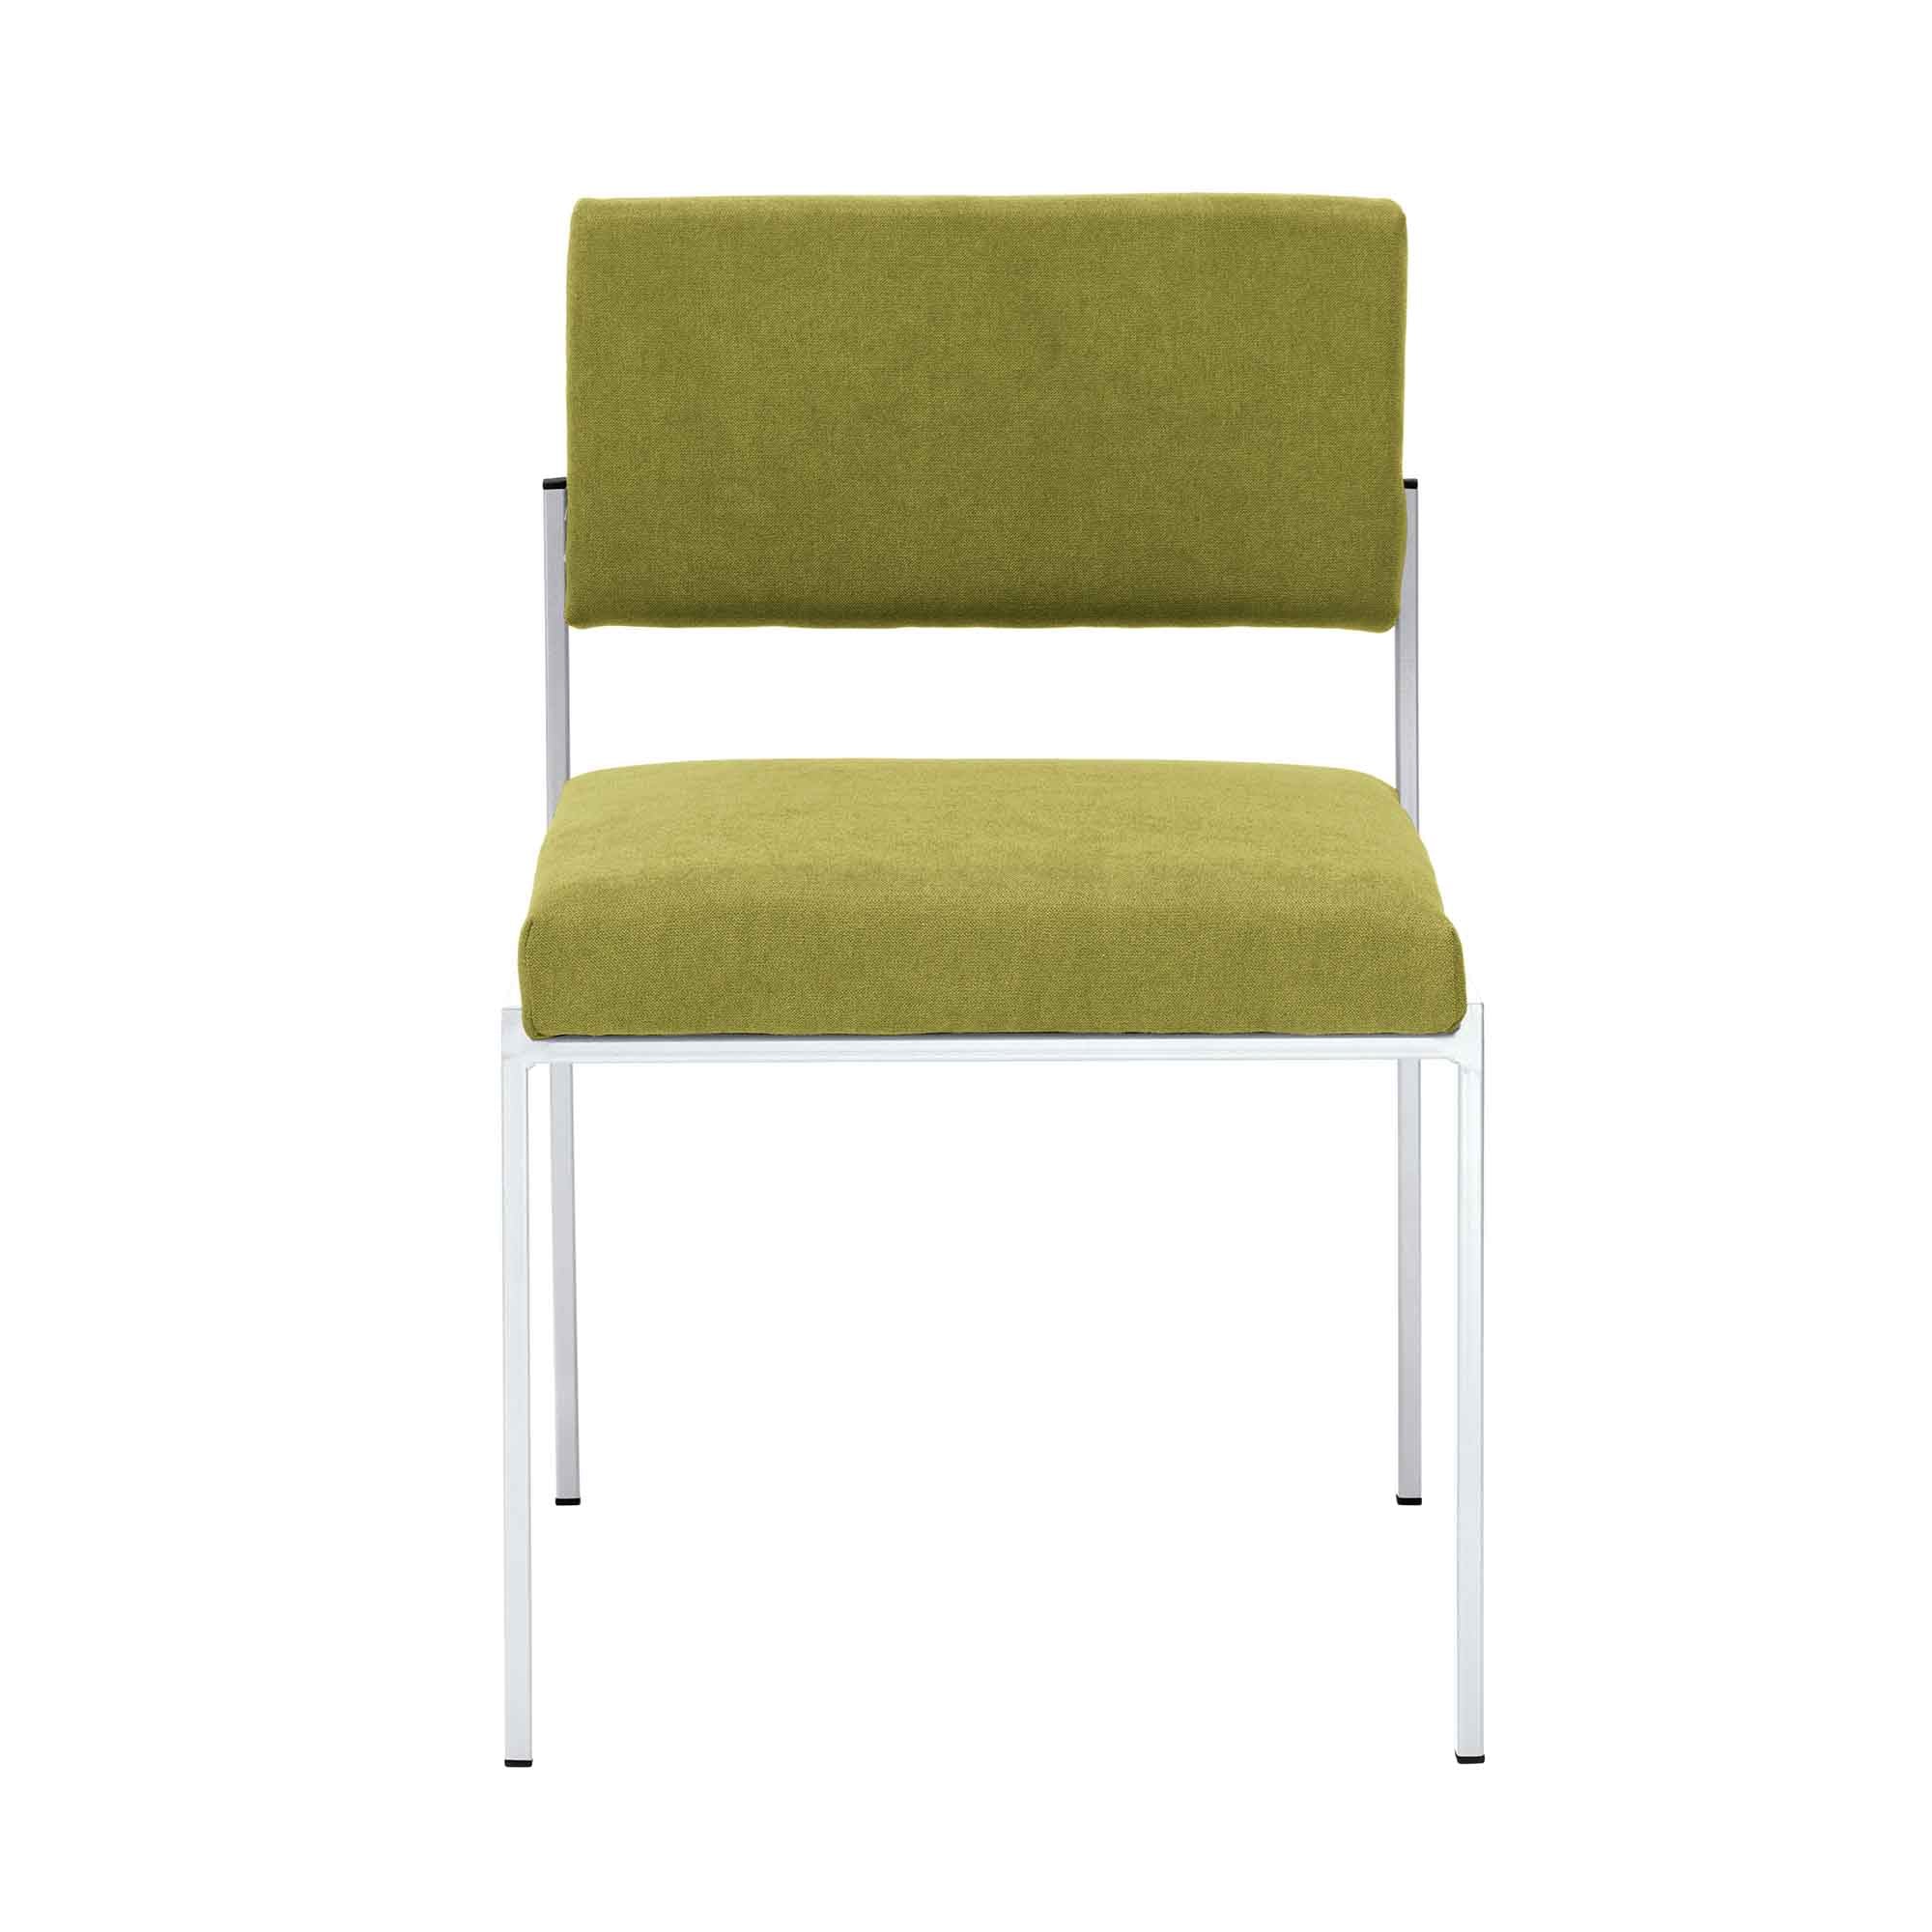  Chair, Powder-Coated Steel Frame, front view green fabric, white frame